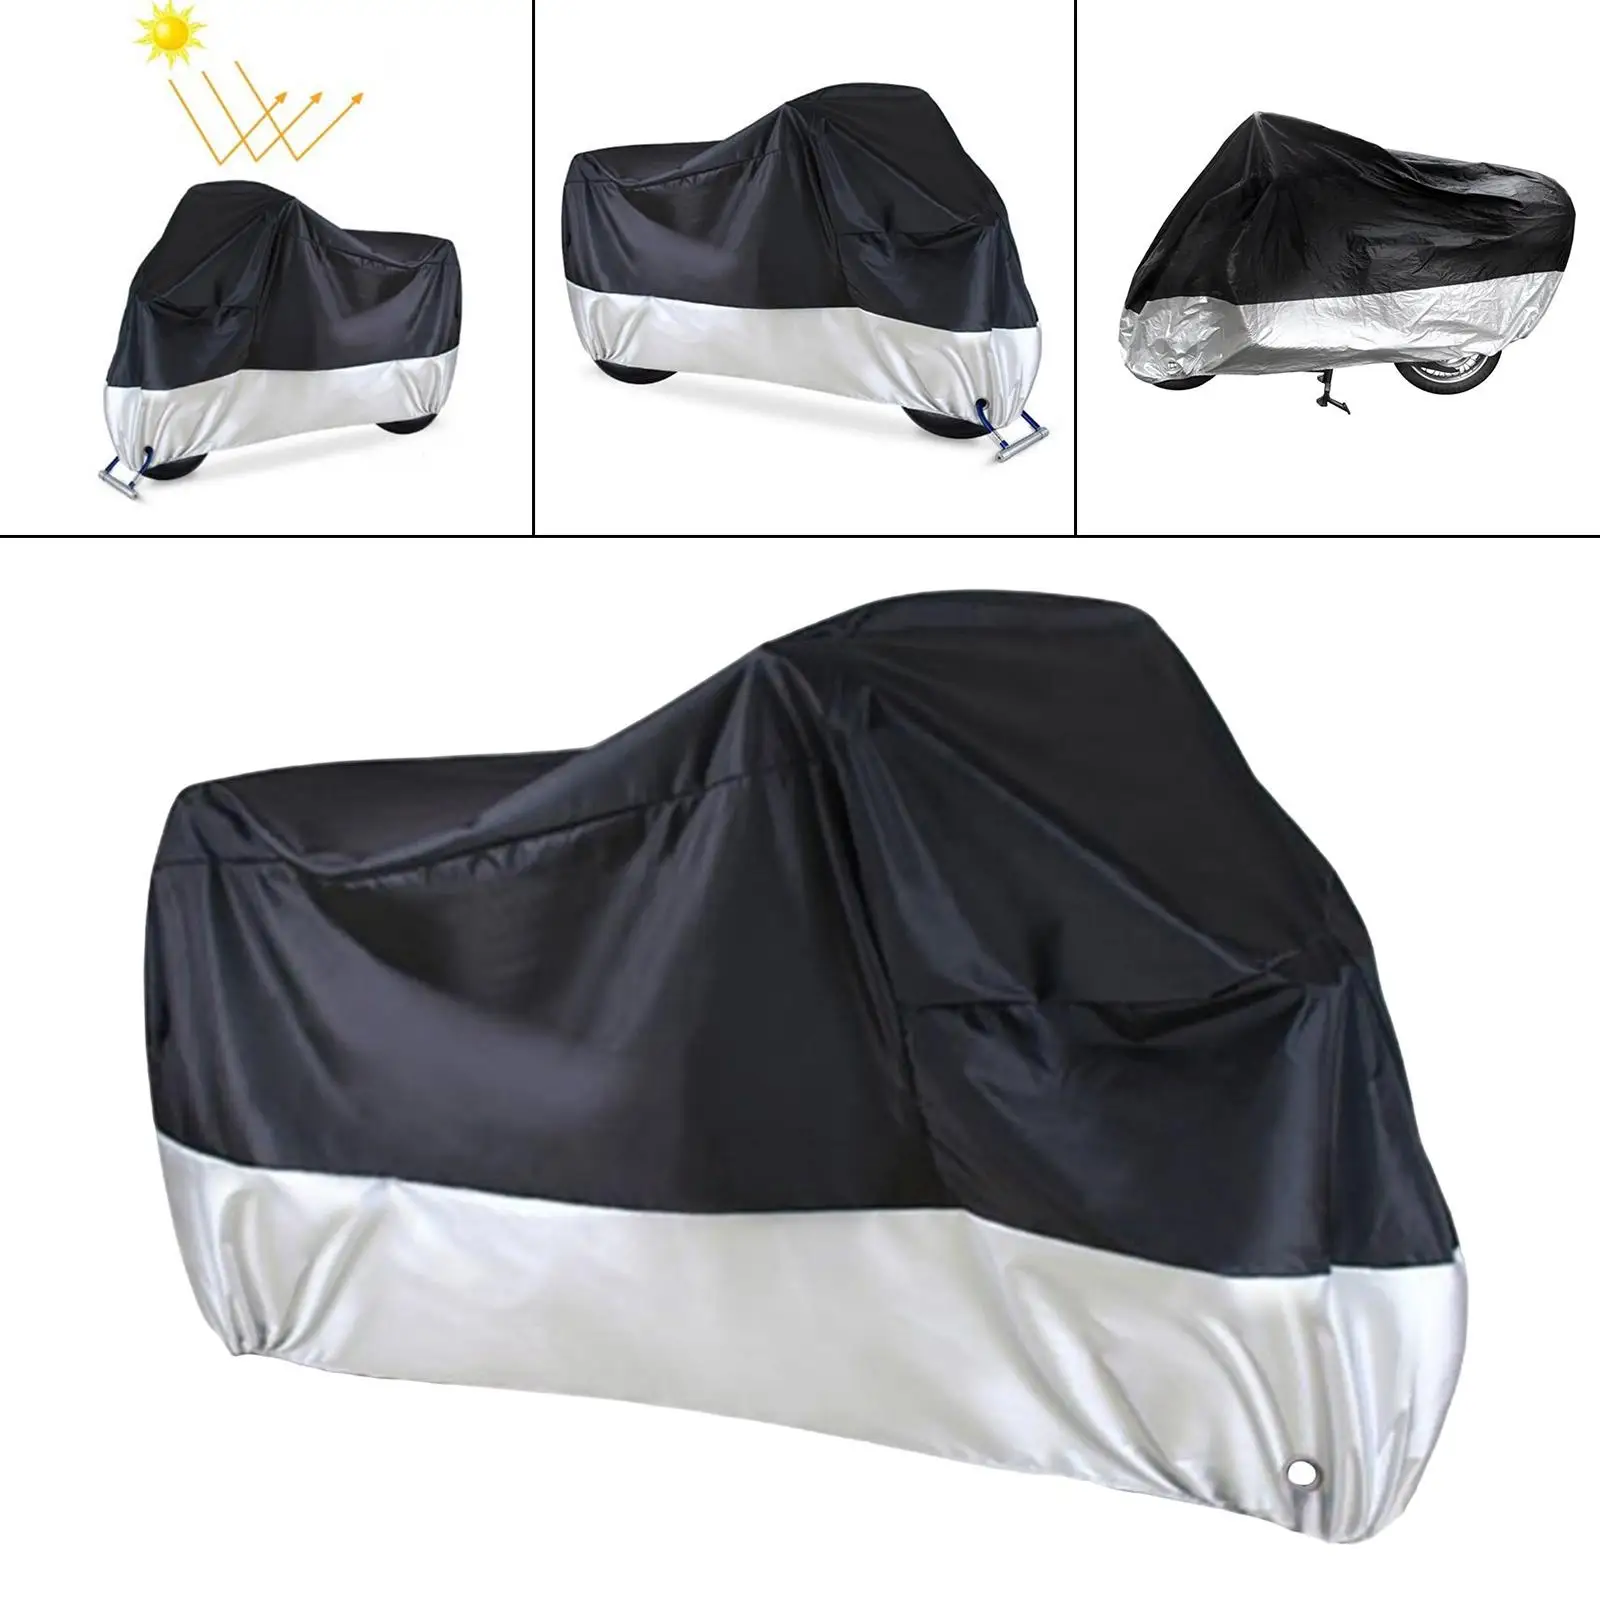 Motorcycle Cover Lightweight 109T Polyester Taffeta PU with Reserved Lock Hole Premium Motorbike Dust  for Large Motorcycles